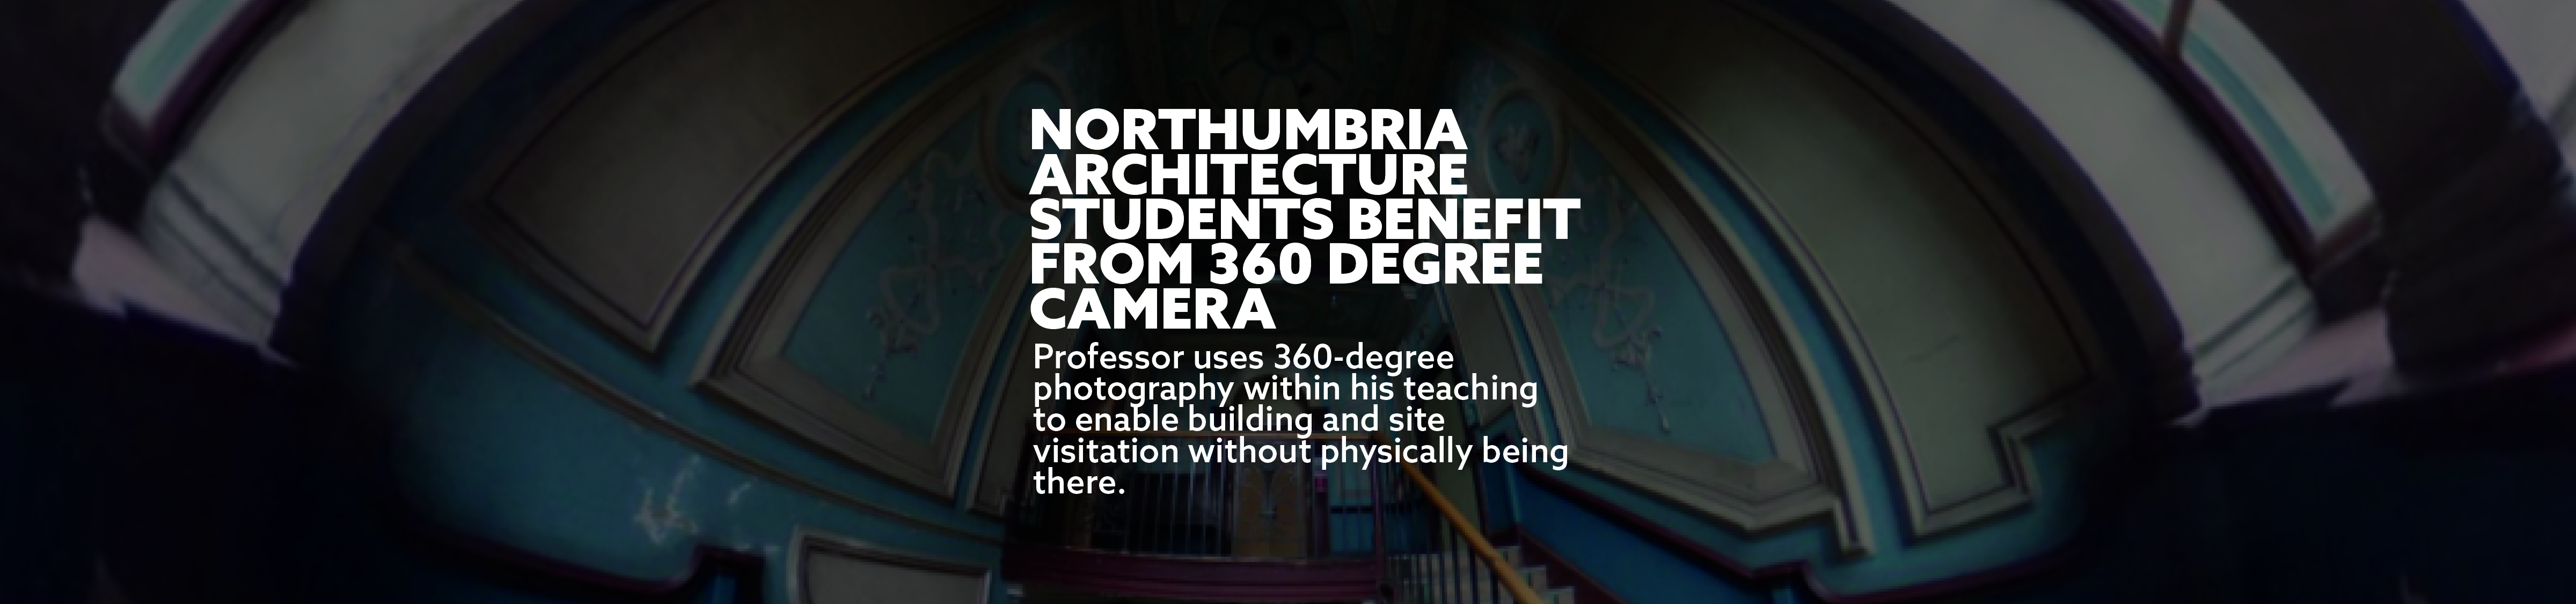 Northumbria Architecture students benefit from 360 degree camera